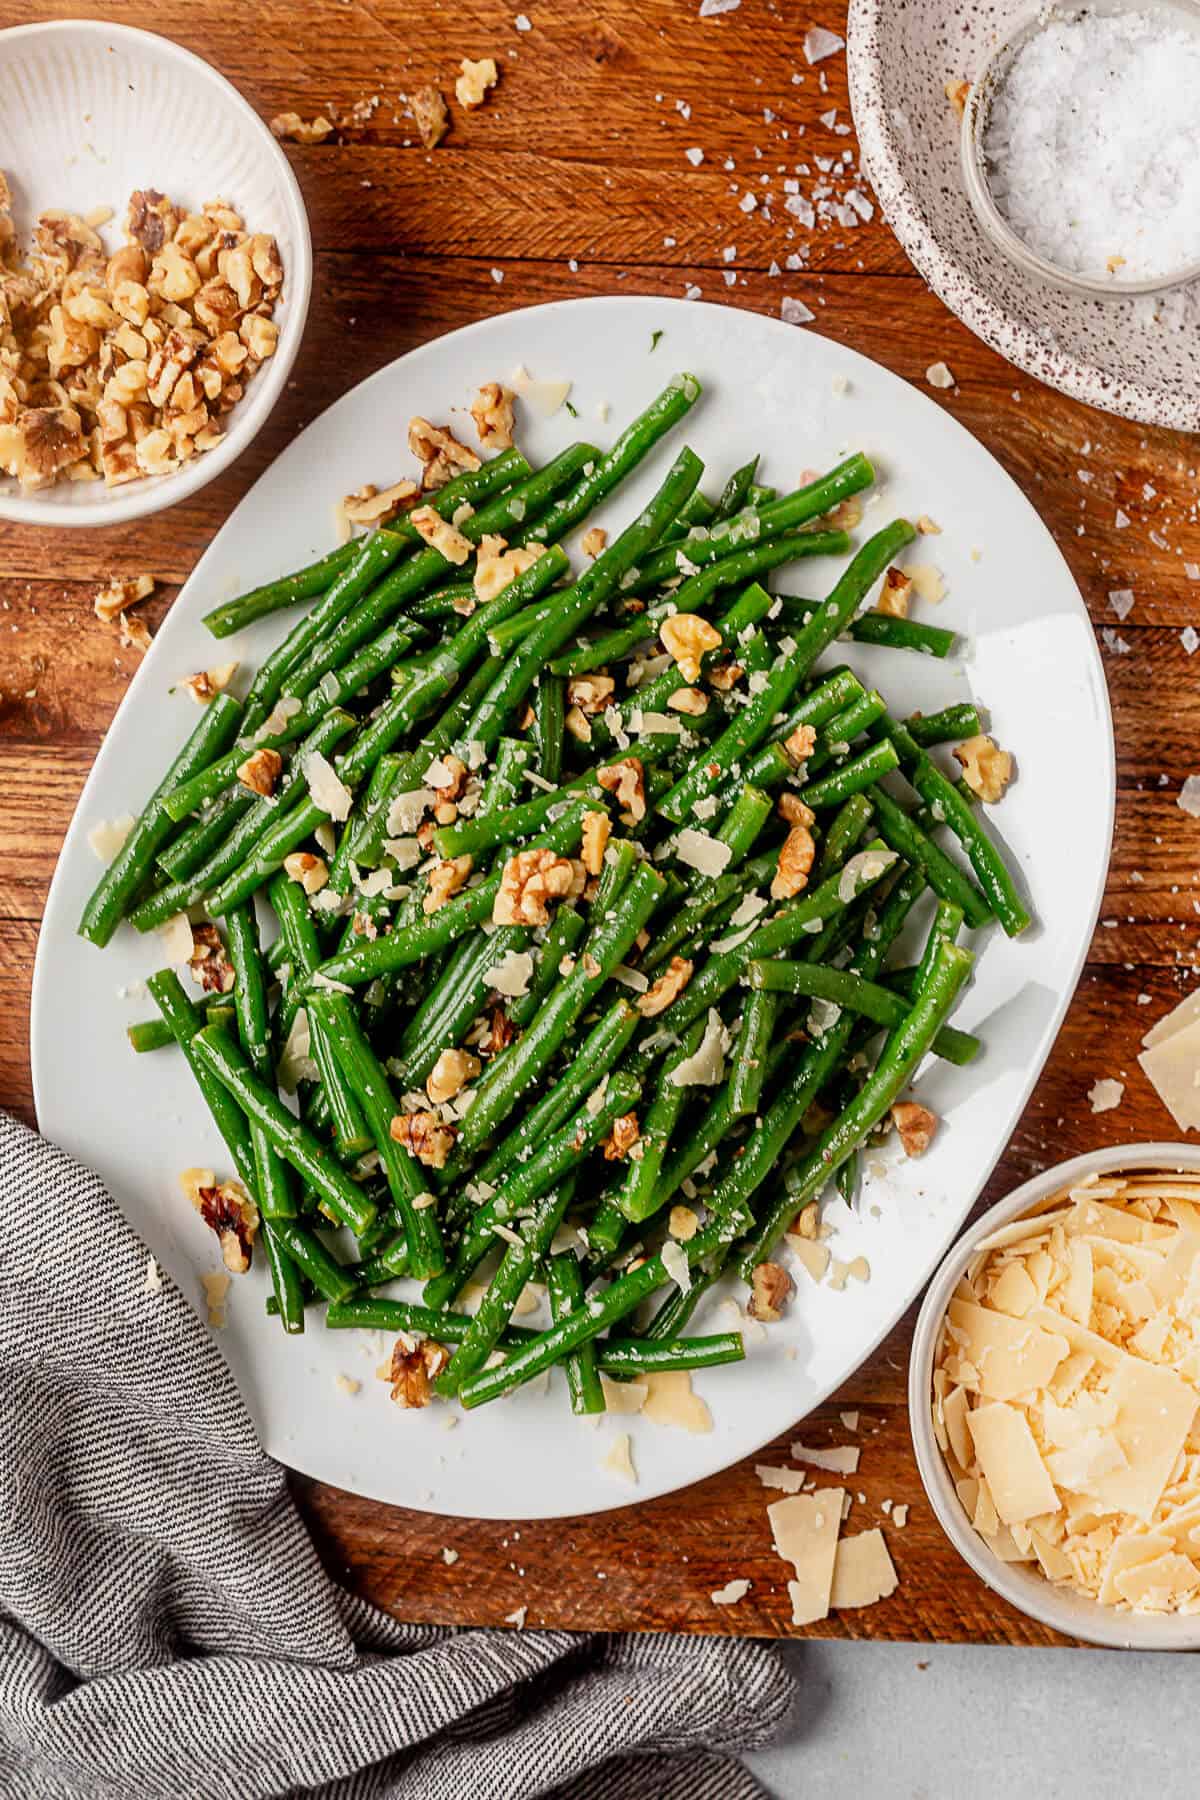 haricot verts on a serving platter sprinkled with parmesan cheese